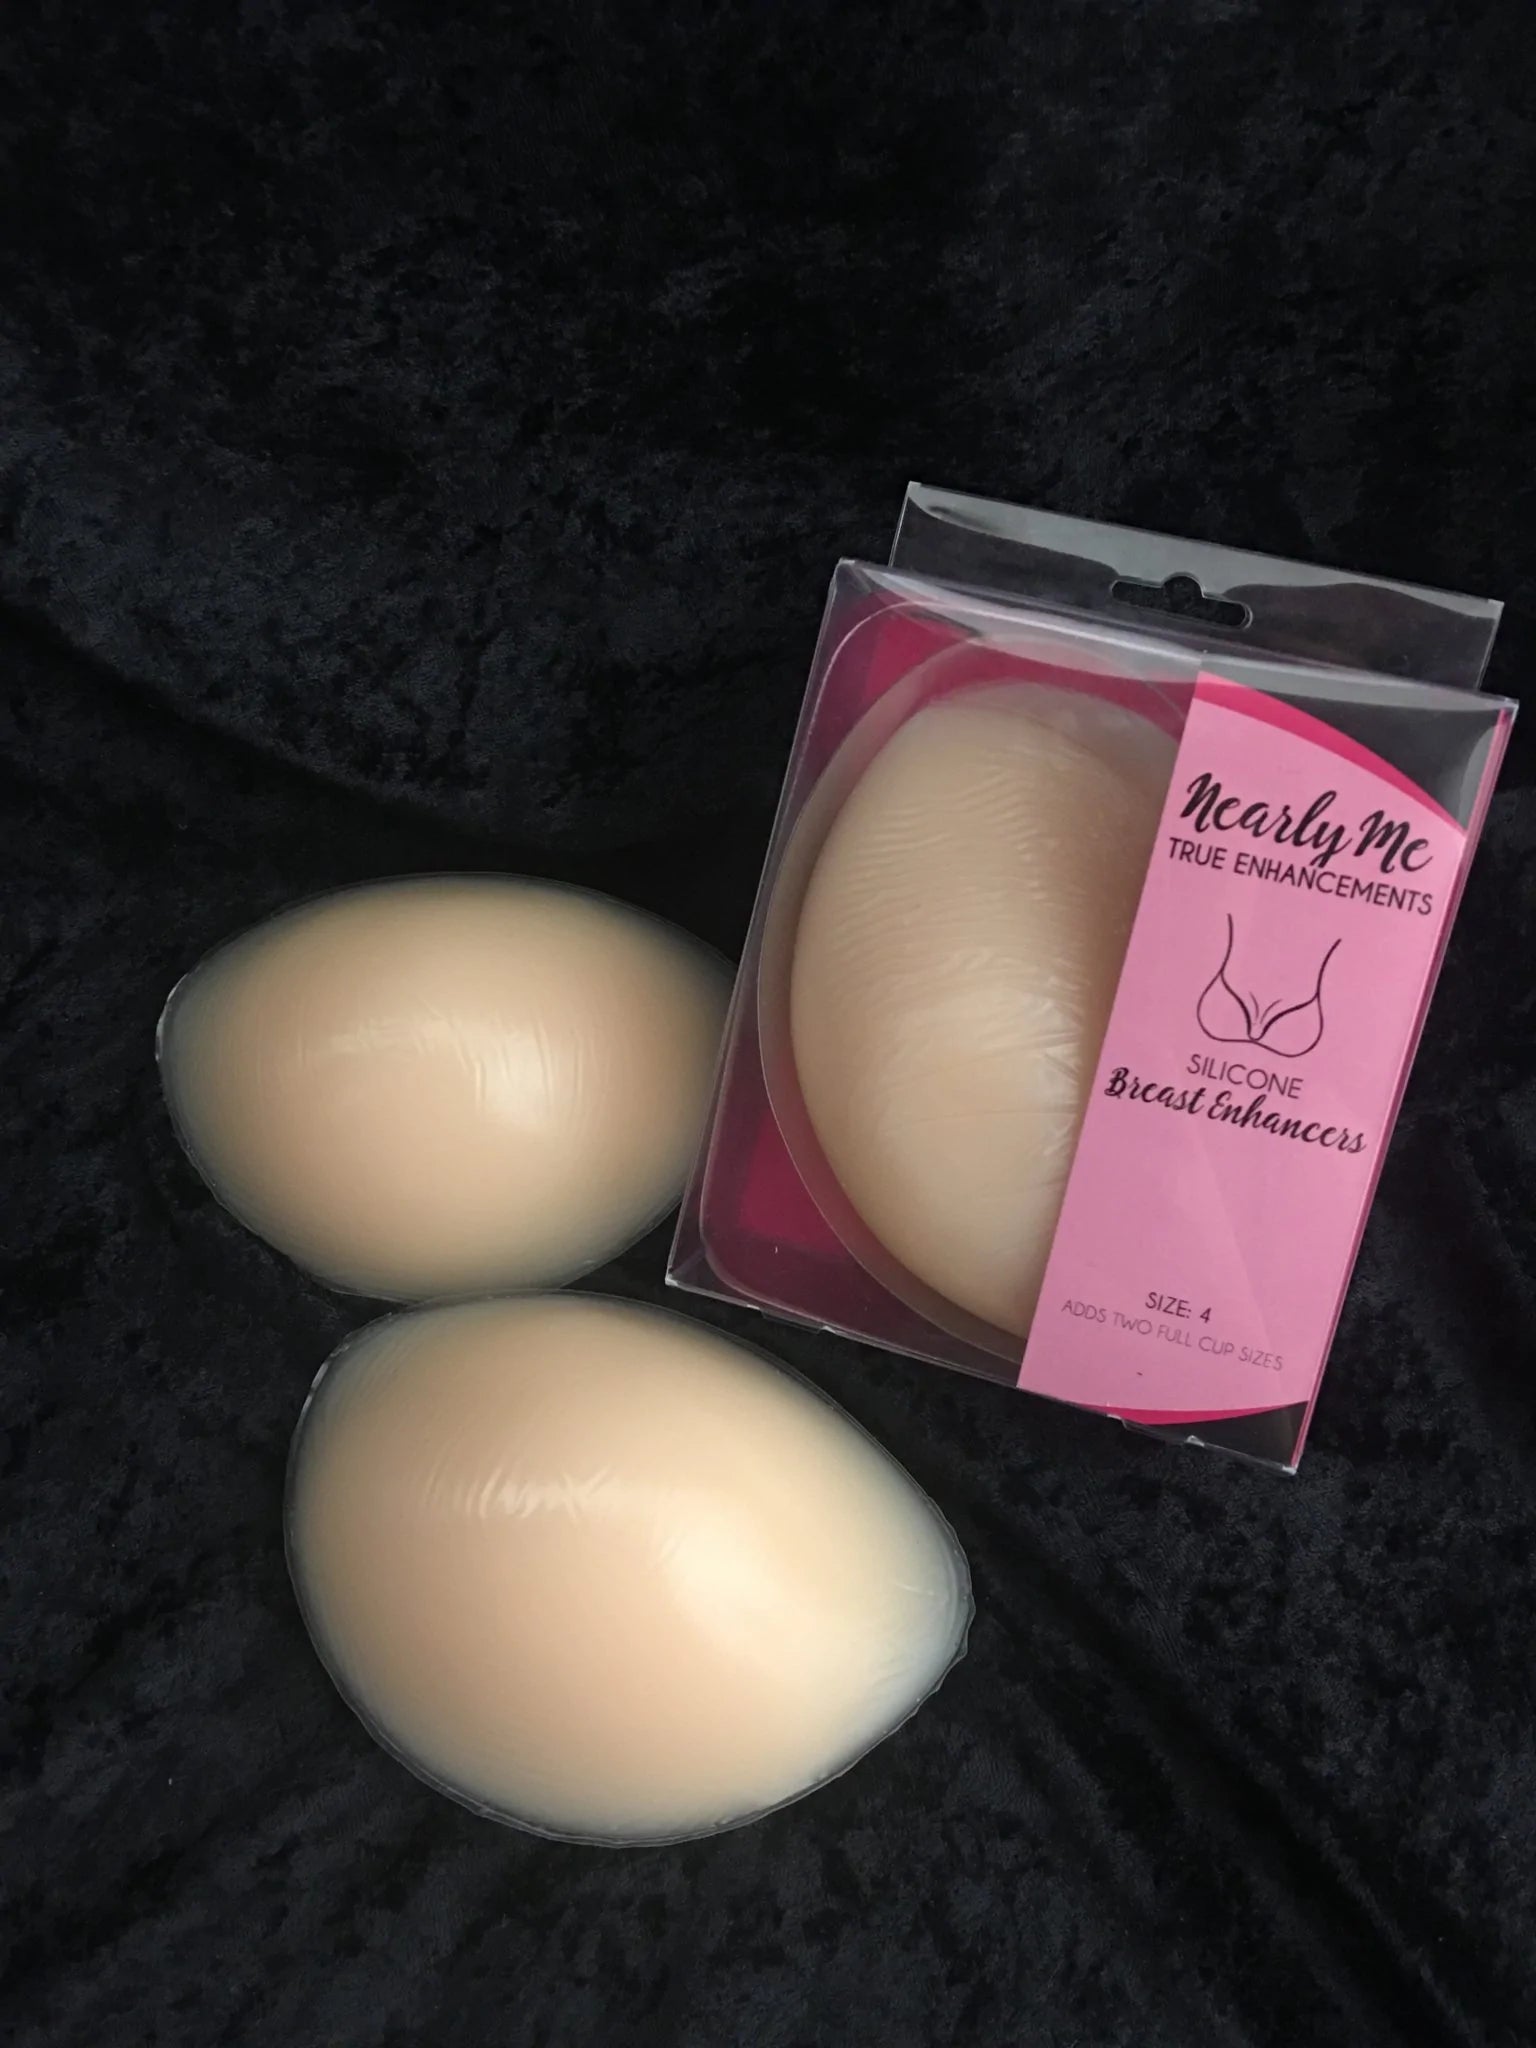 Lightweight Adhesive Silicone Lift Ups Breast Enhancers Bra Cups